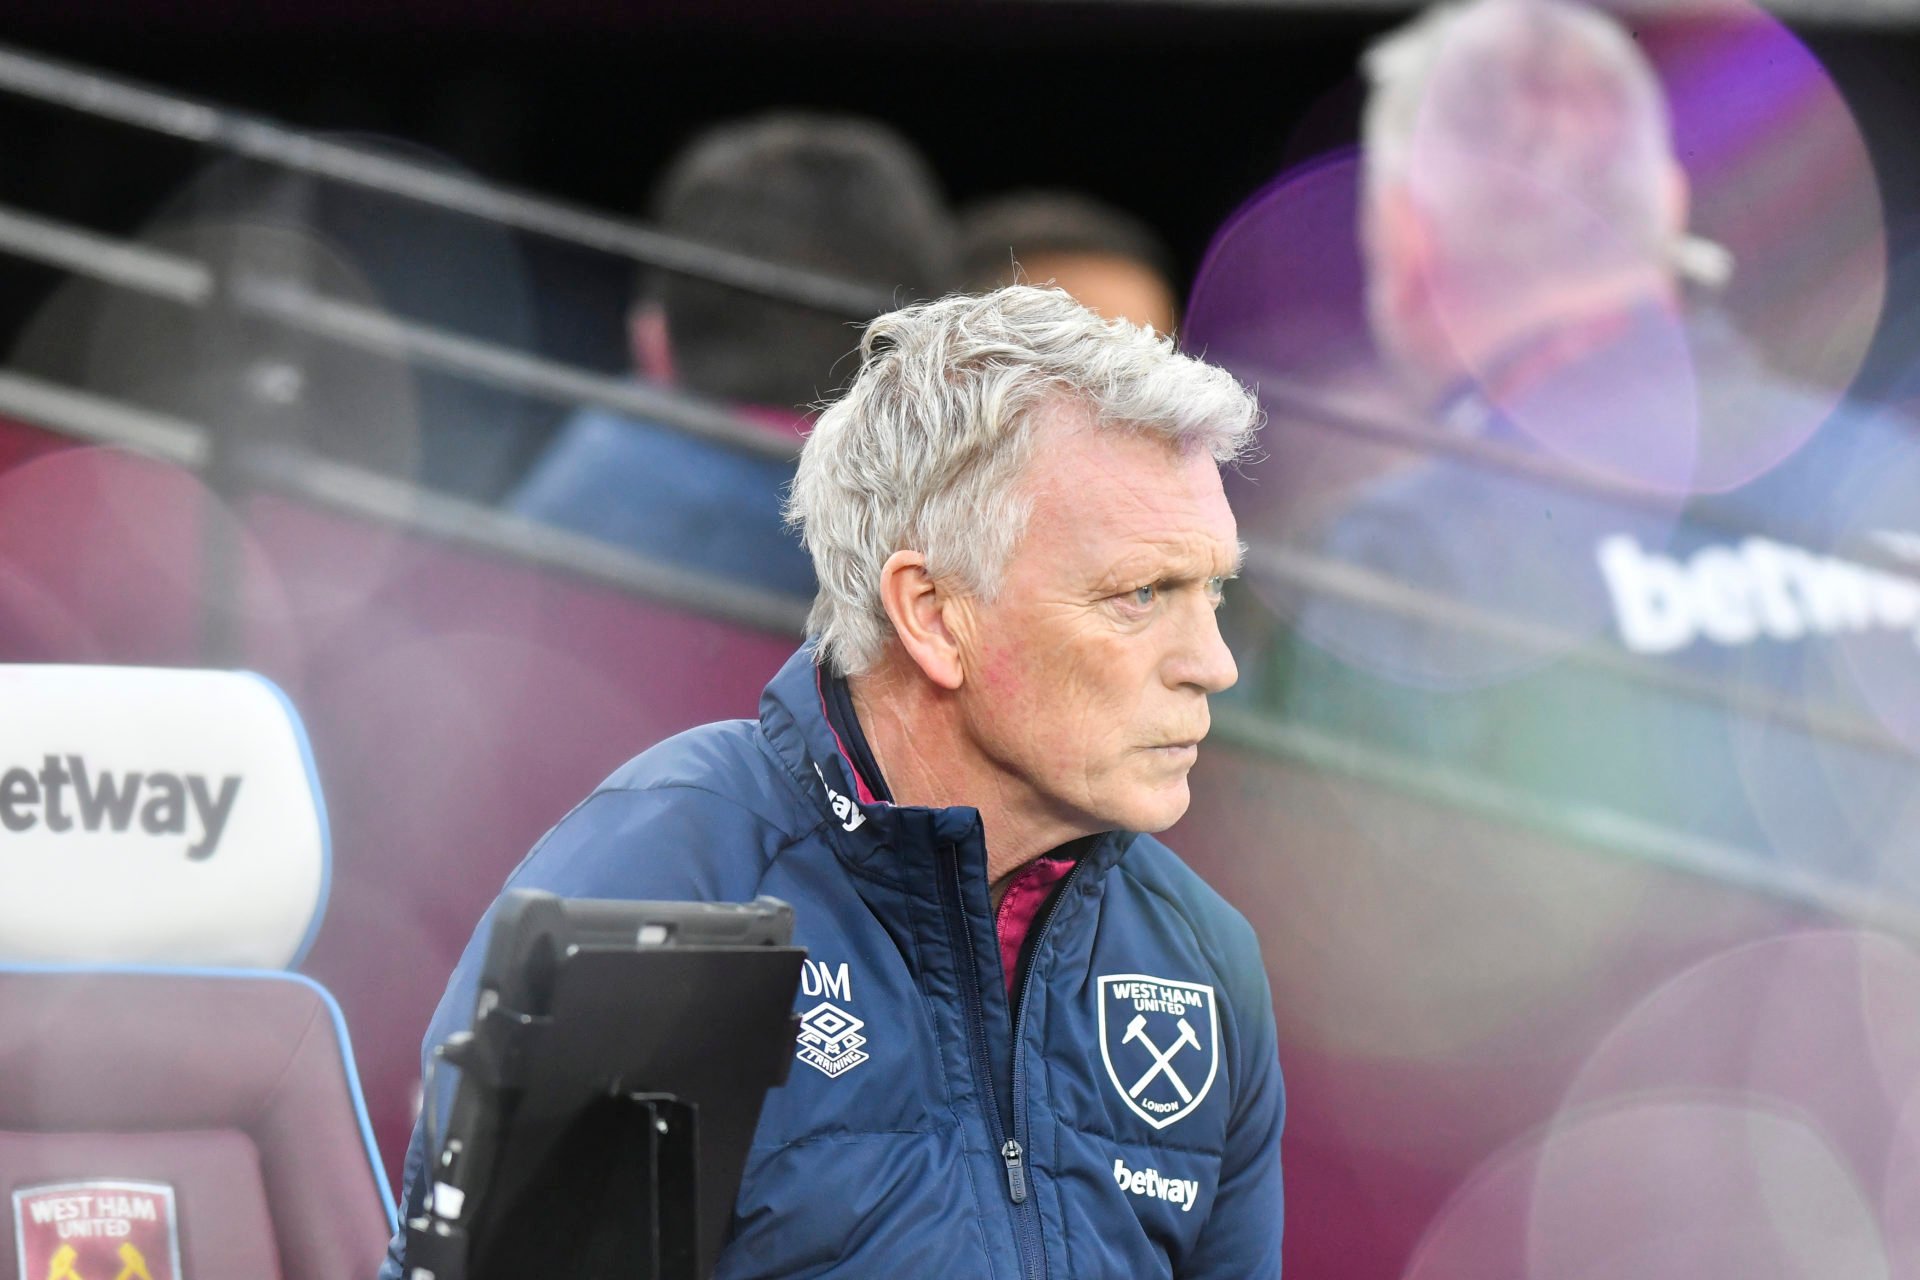 ‘A few…’: David Moyes shares cryptic injury update ahead of Crystal Palace vs West Ham